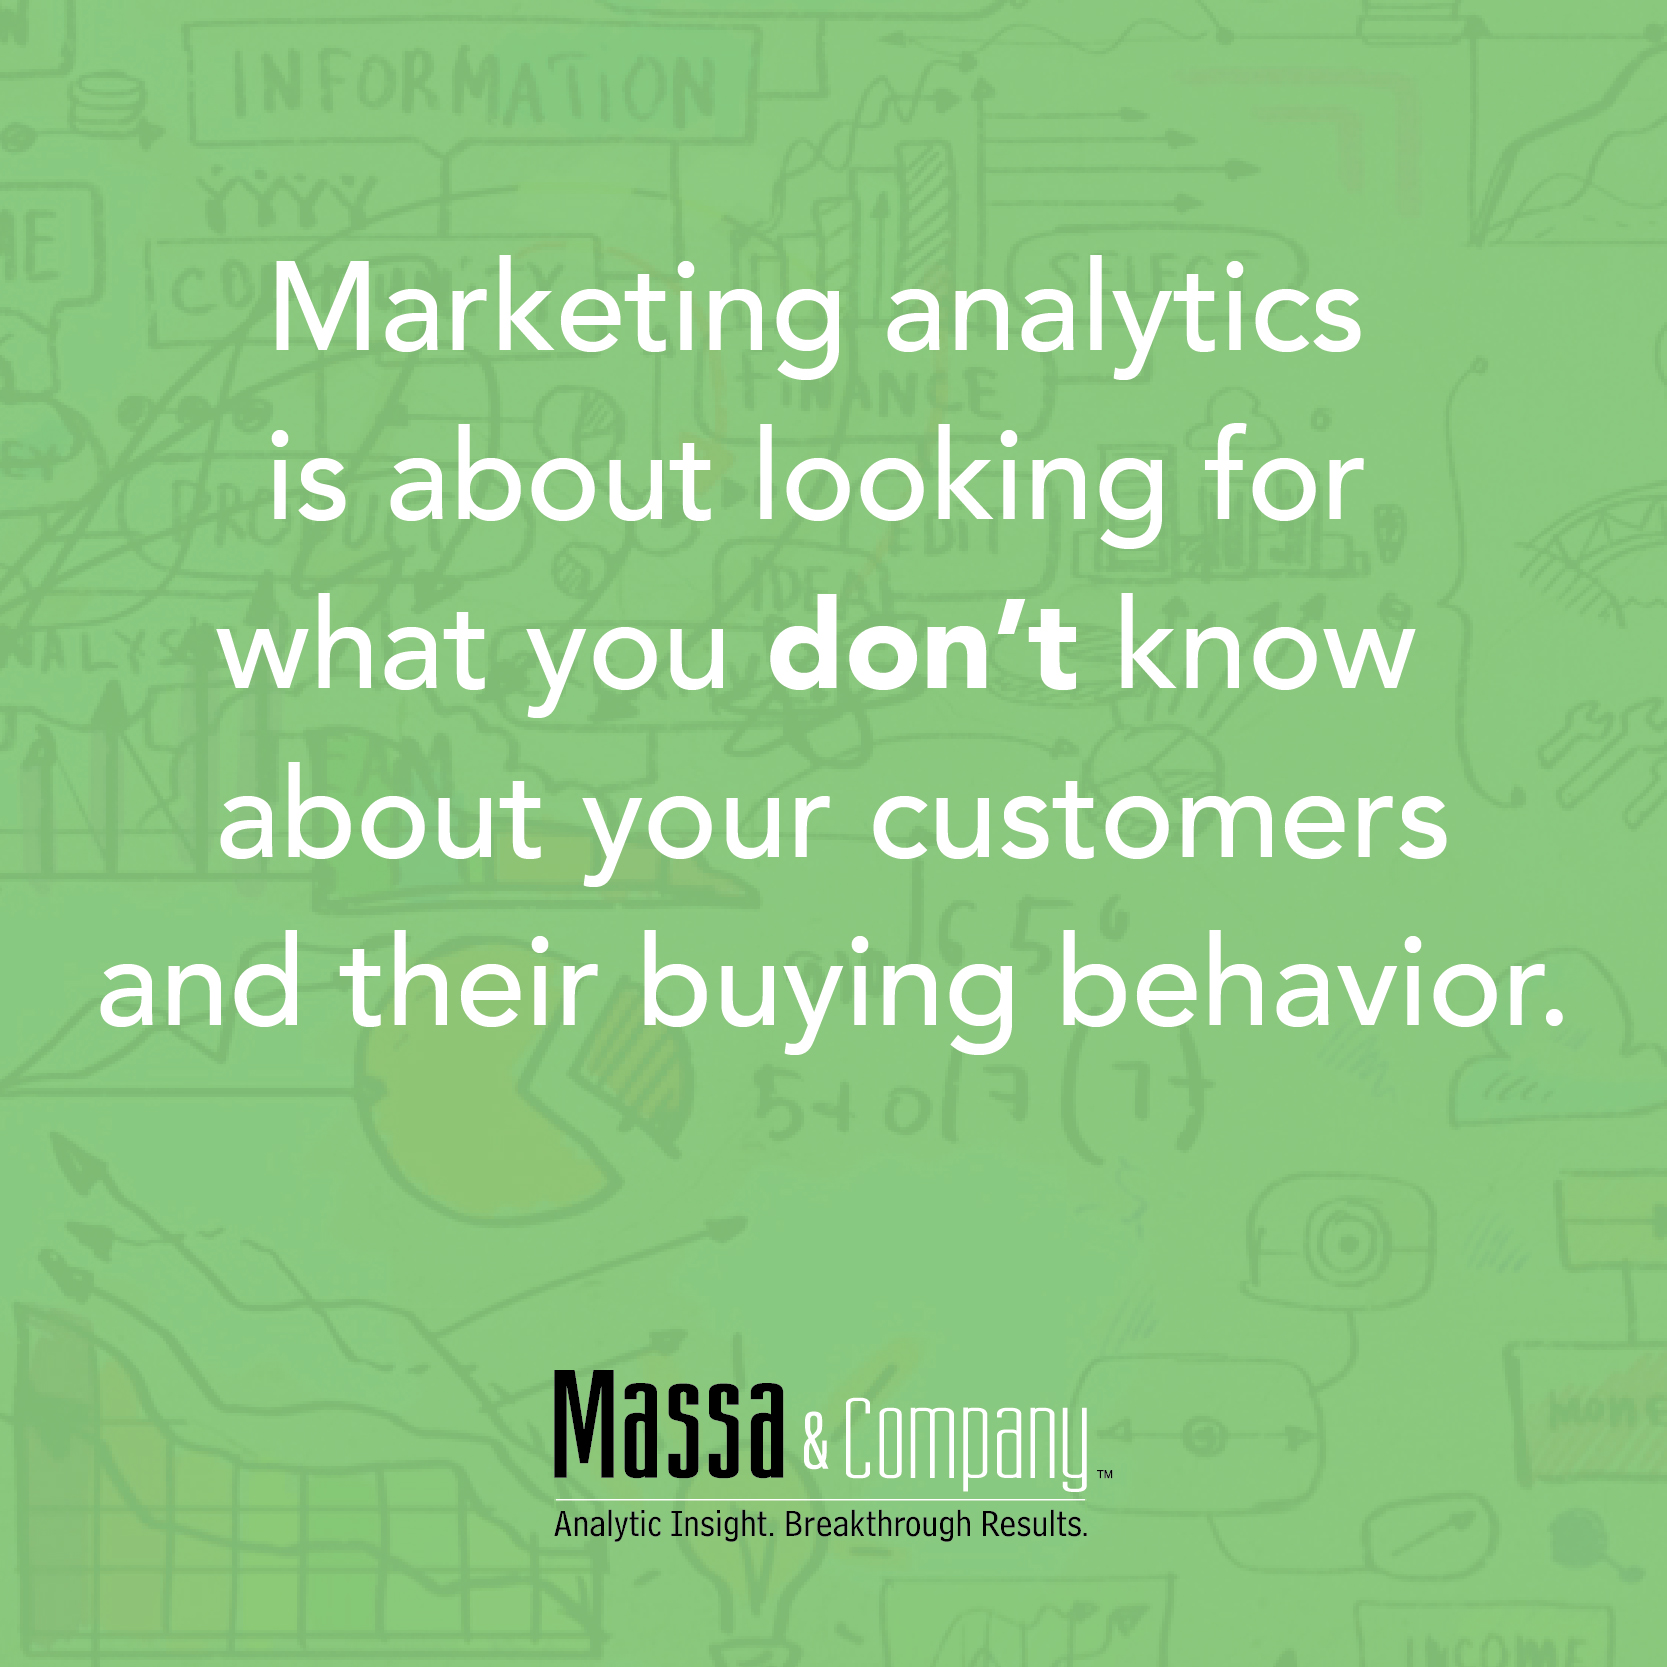 Marketing analytics is about looking for what you don't know about your customers and their buying behavior.